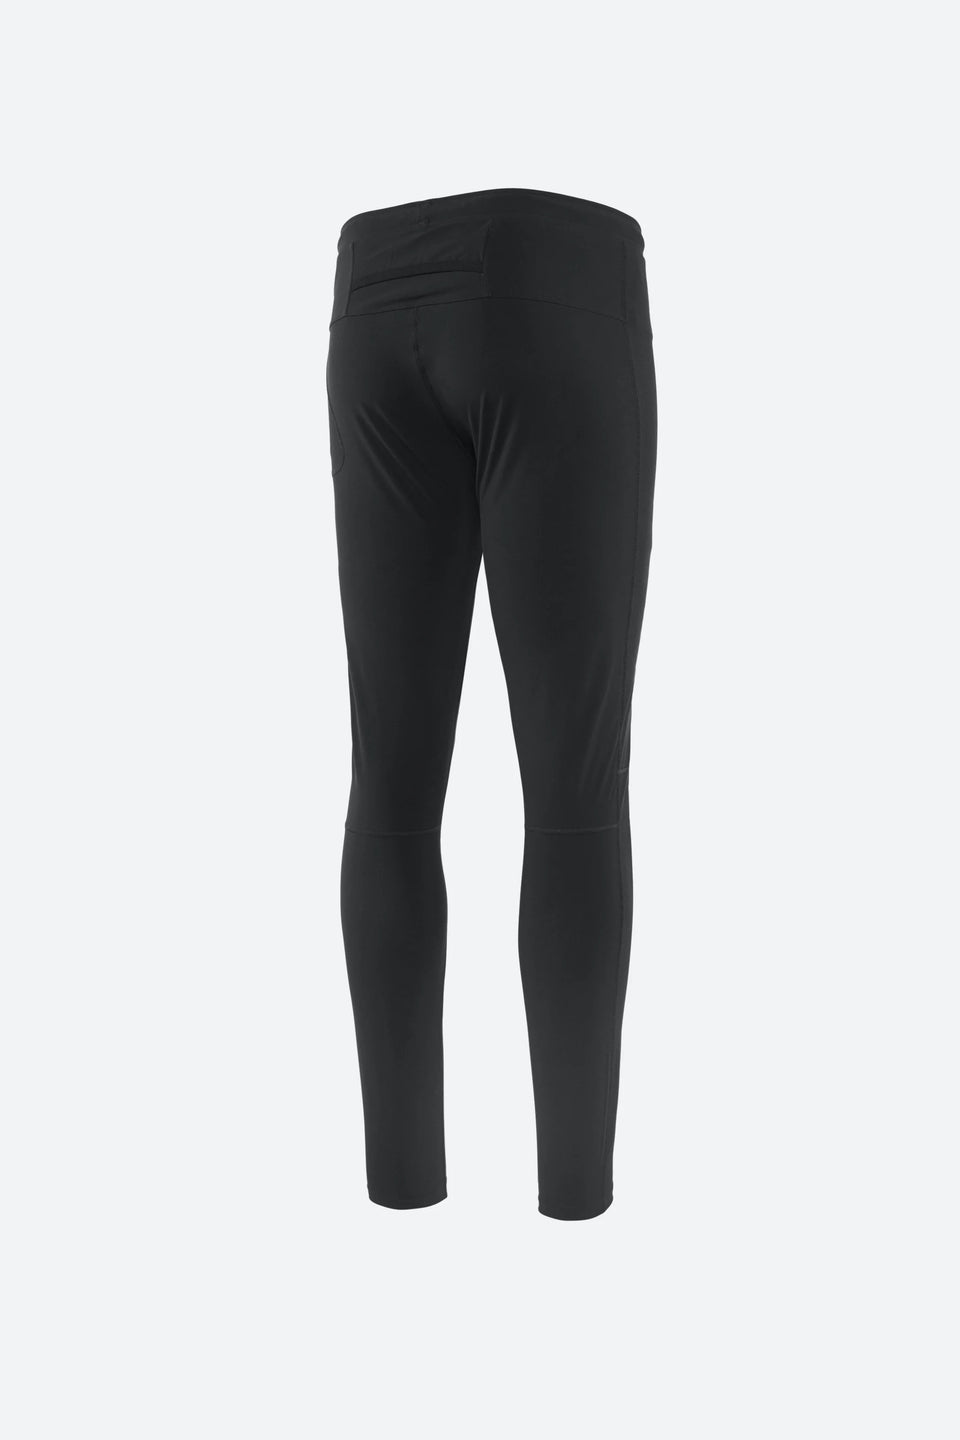 District Vision FW23 Men's Collection Los Angeles Running Apparel Full-Length Recycled Tights Black Calculus Victoria BC Canada